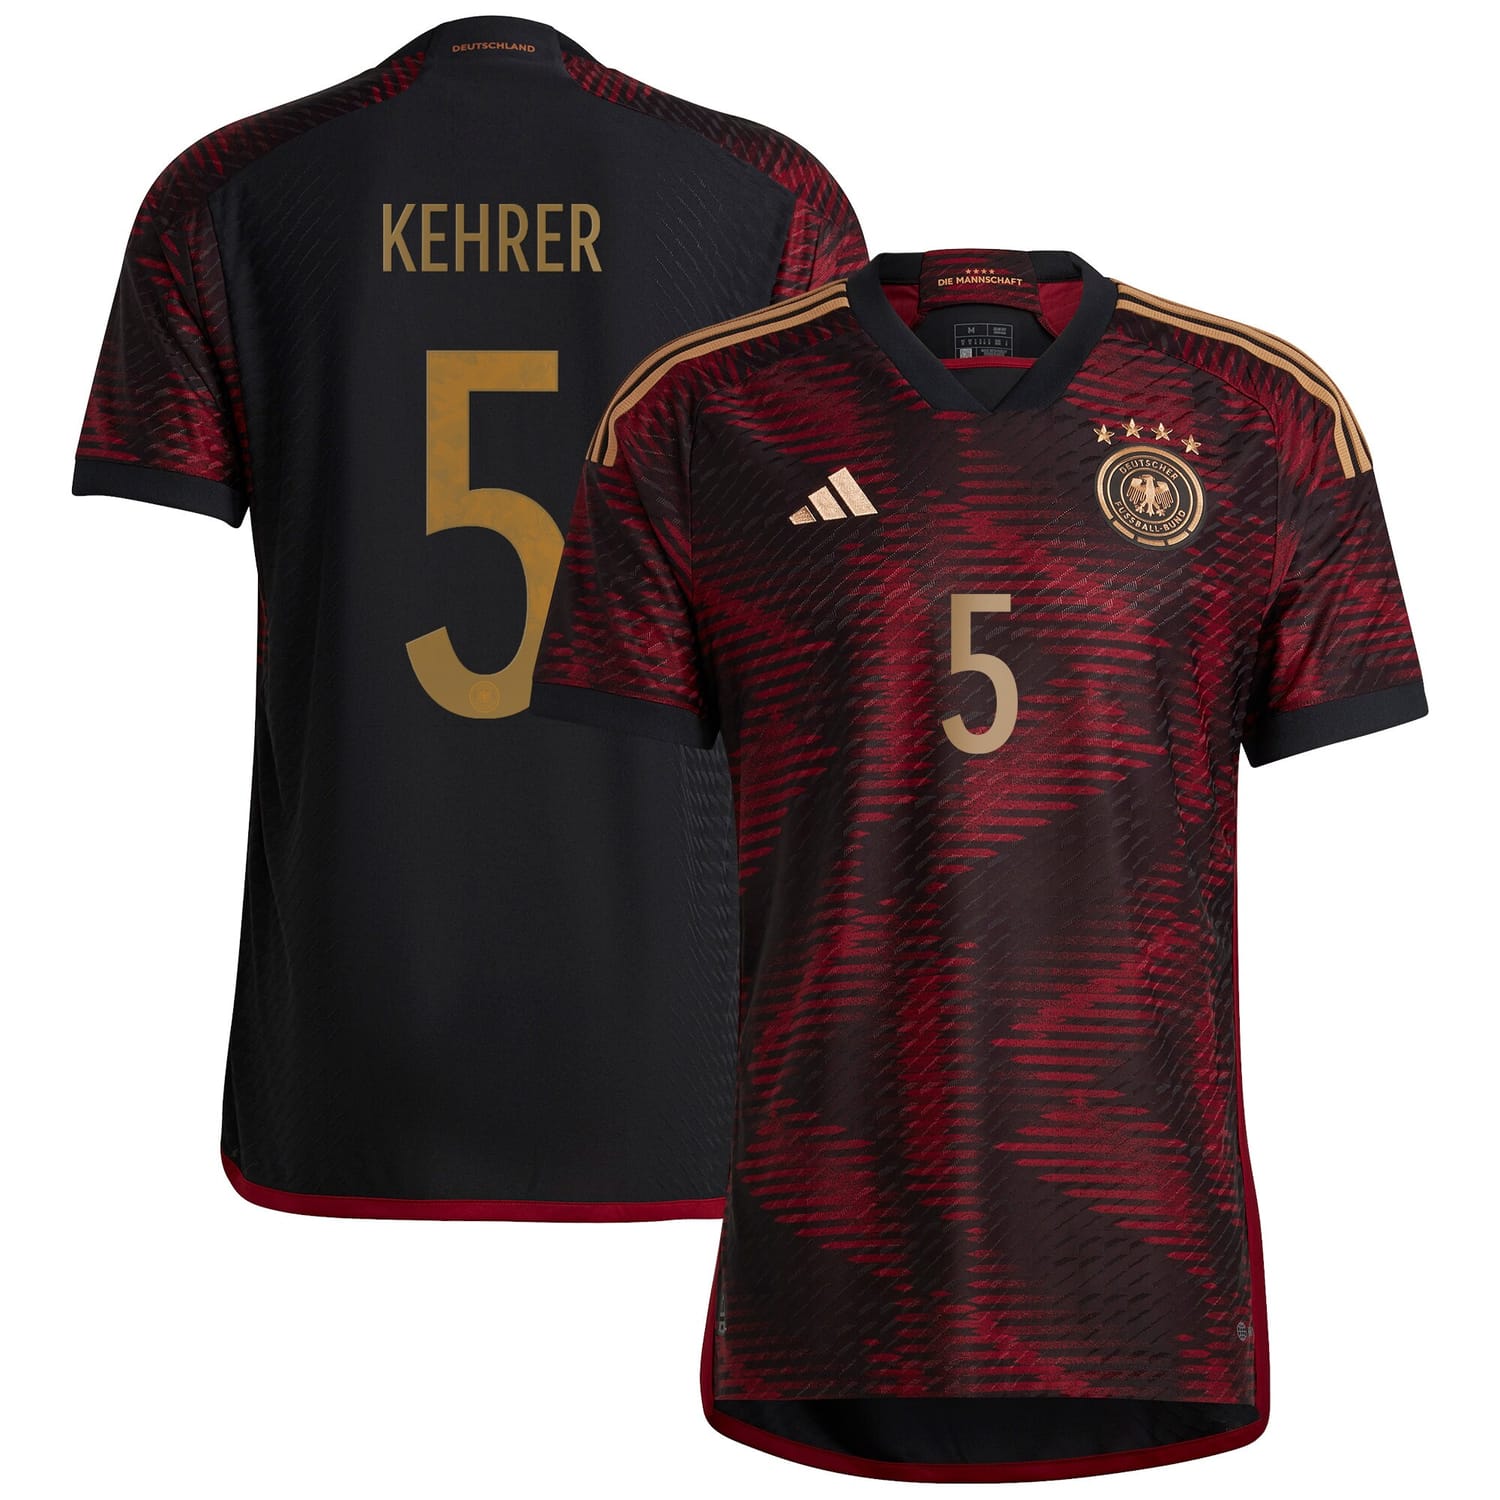 Germany National Team Away Authentic Jersey Shirt player Kehrer 5 printing for Men